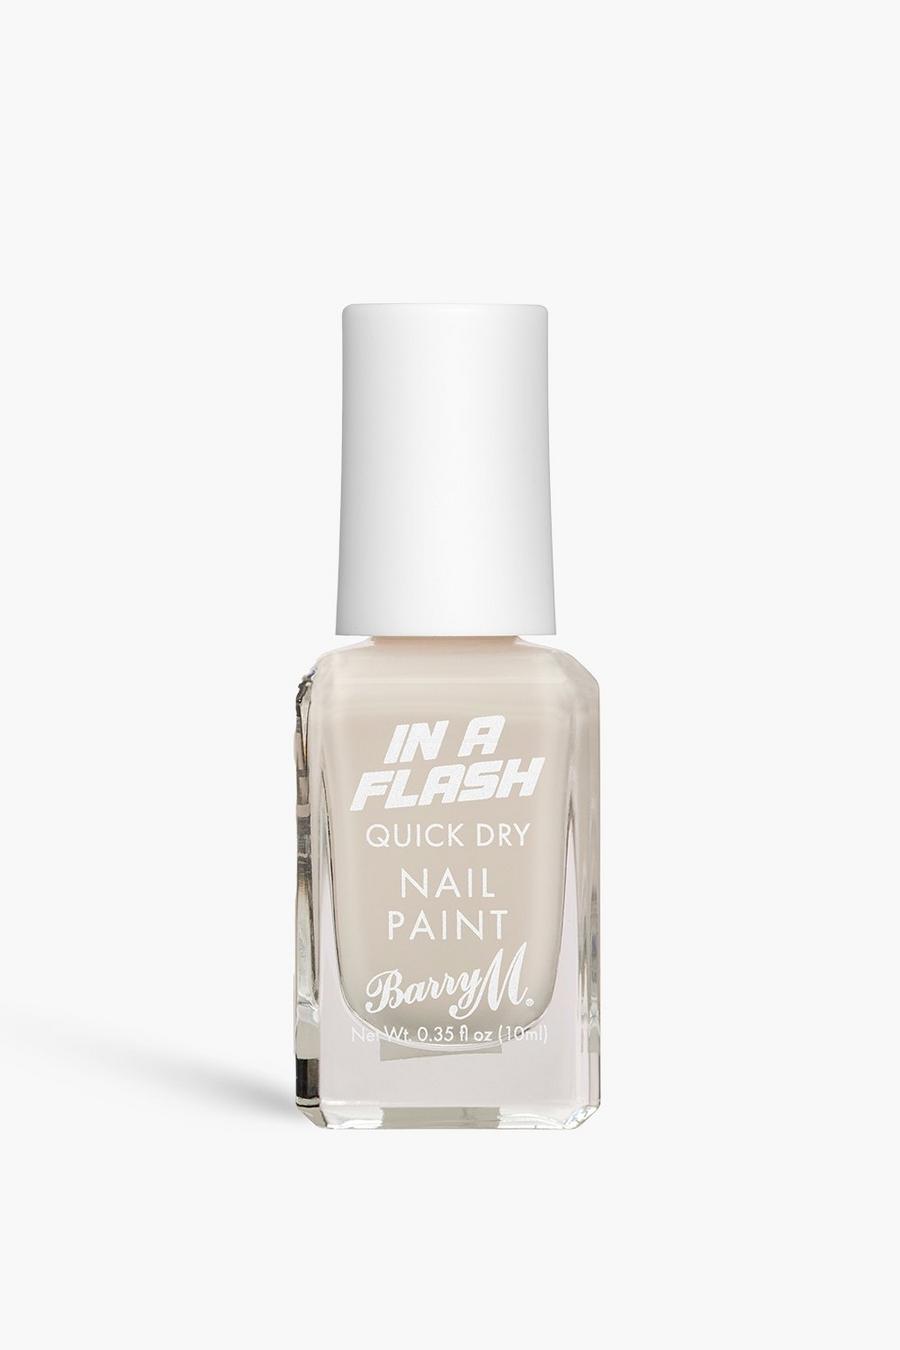 Barry M In A Flash Quick Dry Nail Paint, Cream blanc